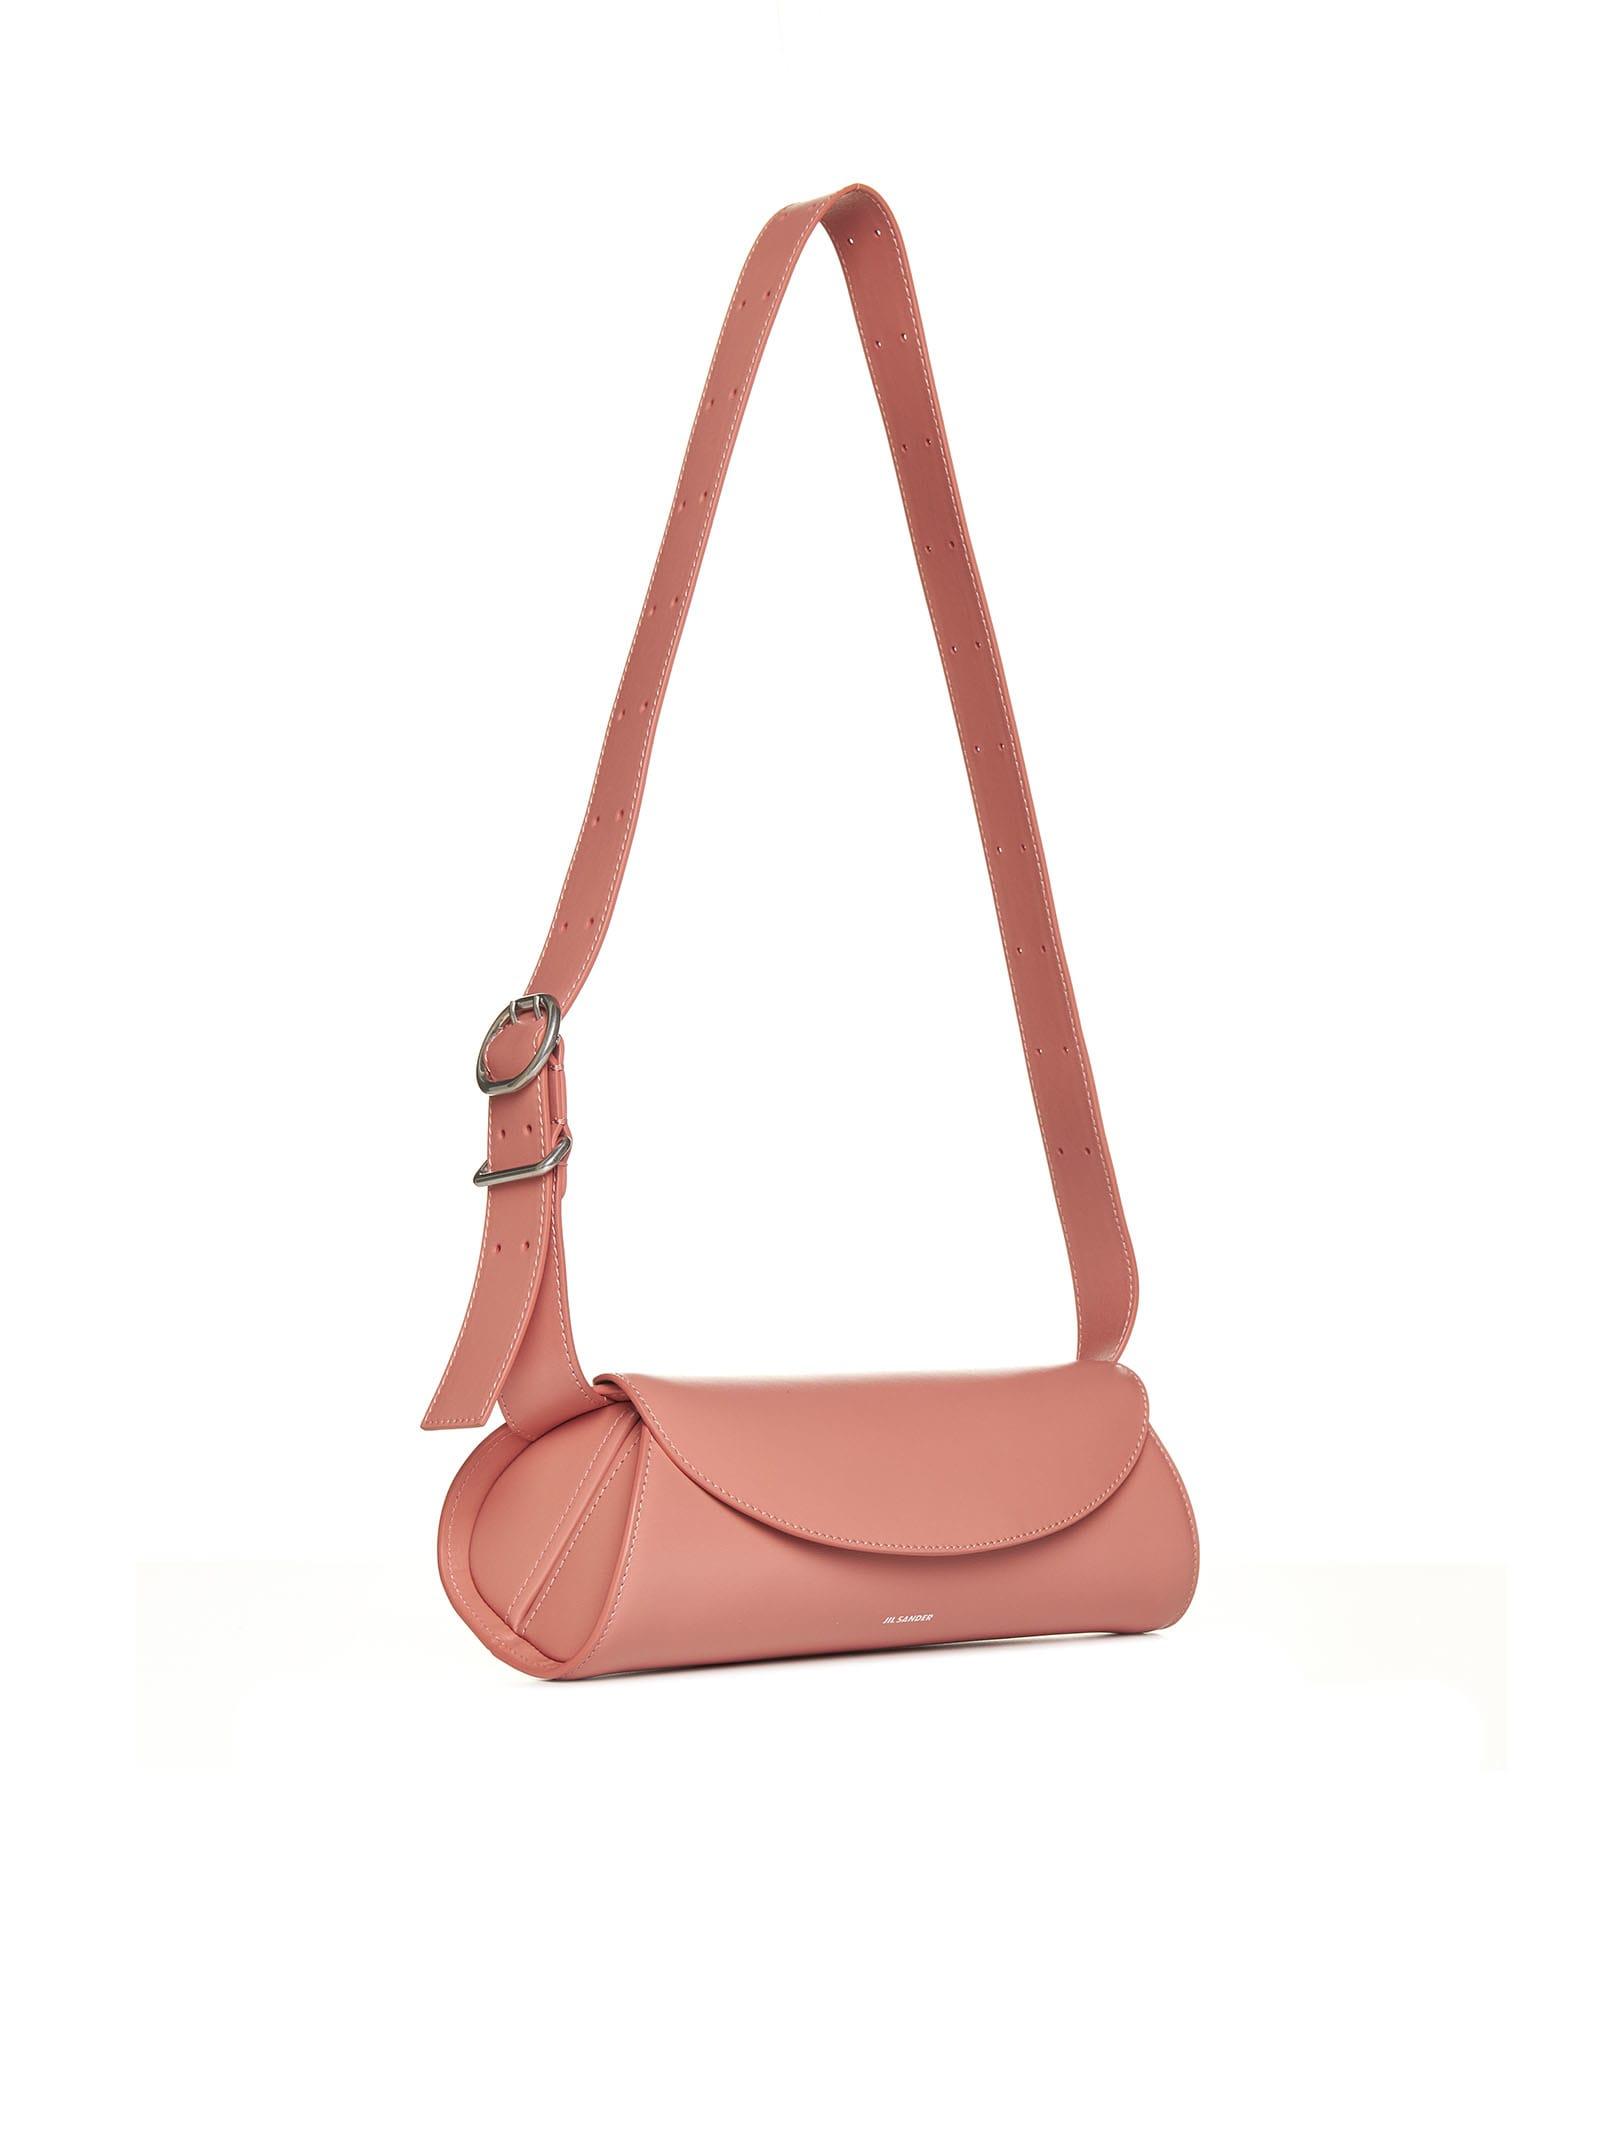 Jil Sander Cannolo Small Leather Bag in Pink | Lyst